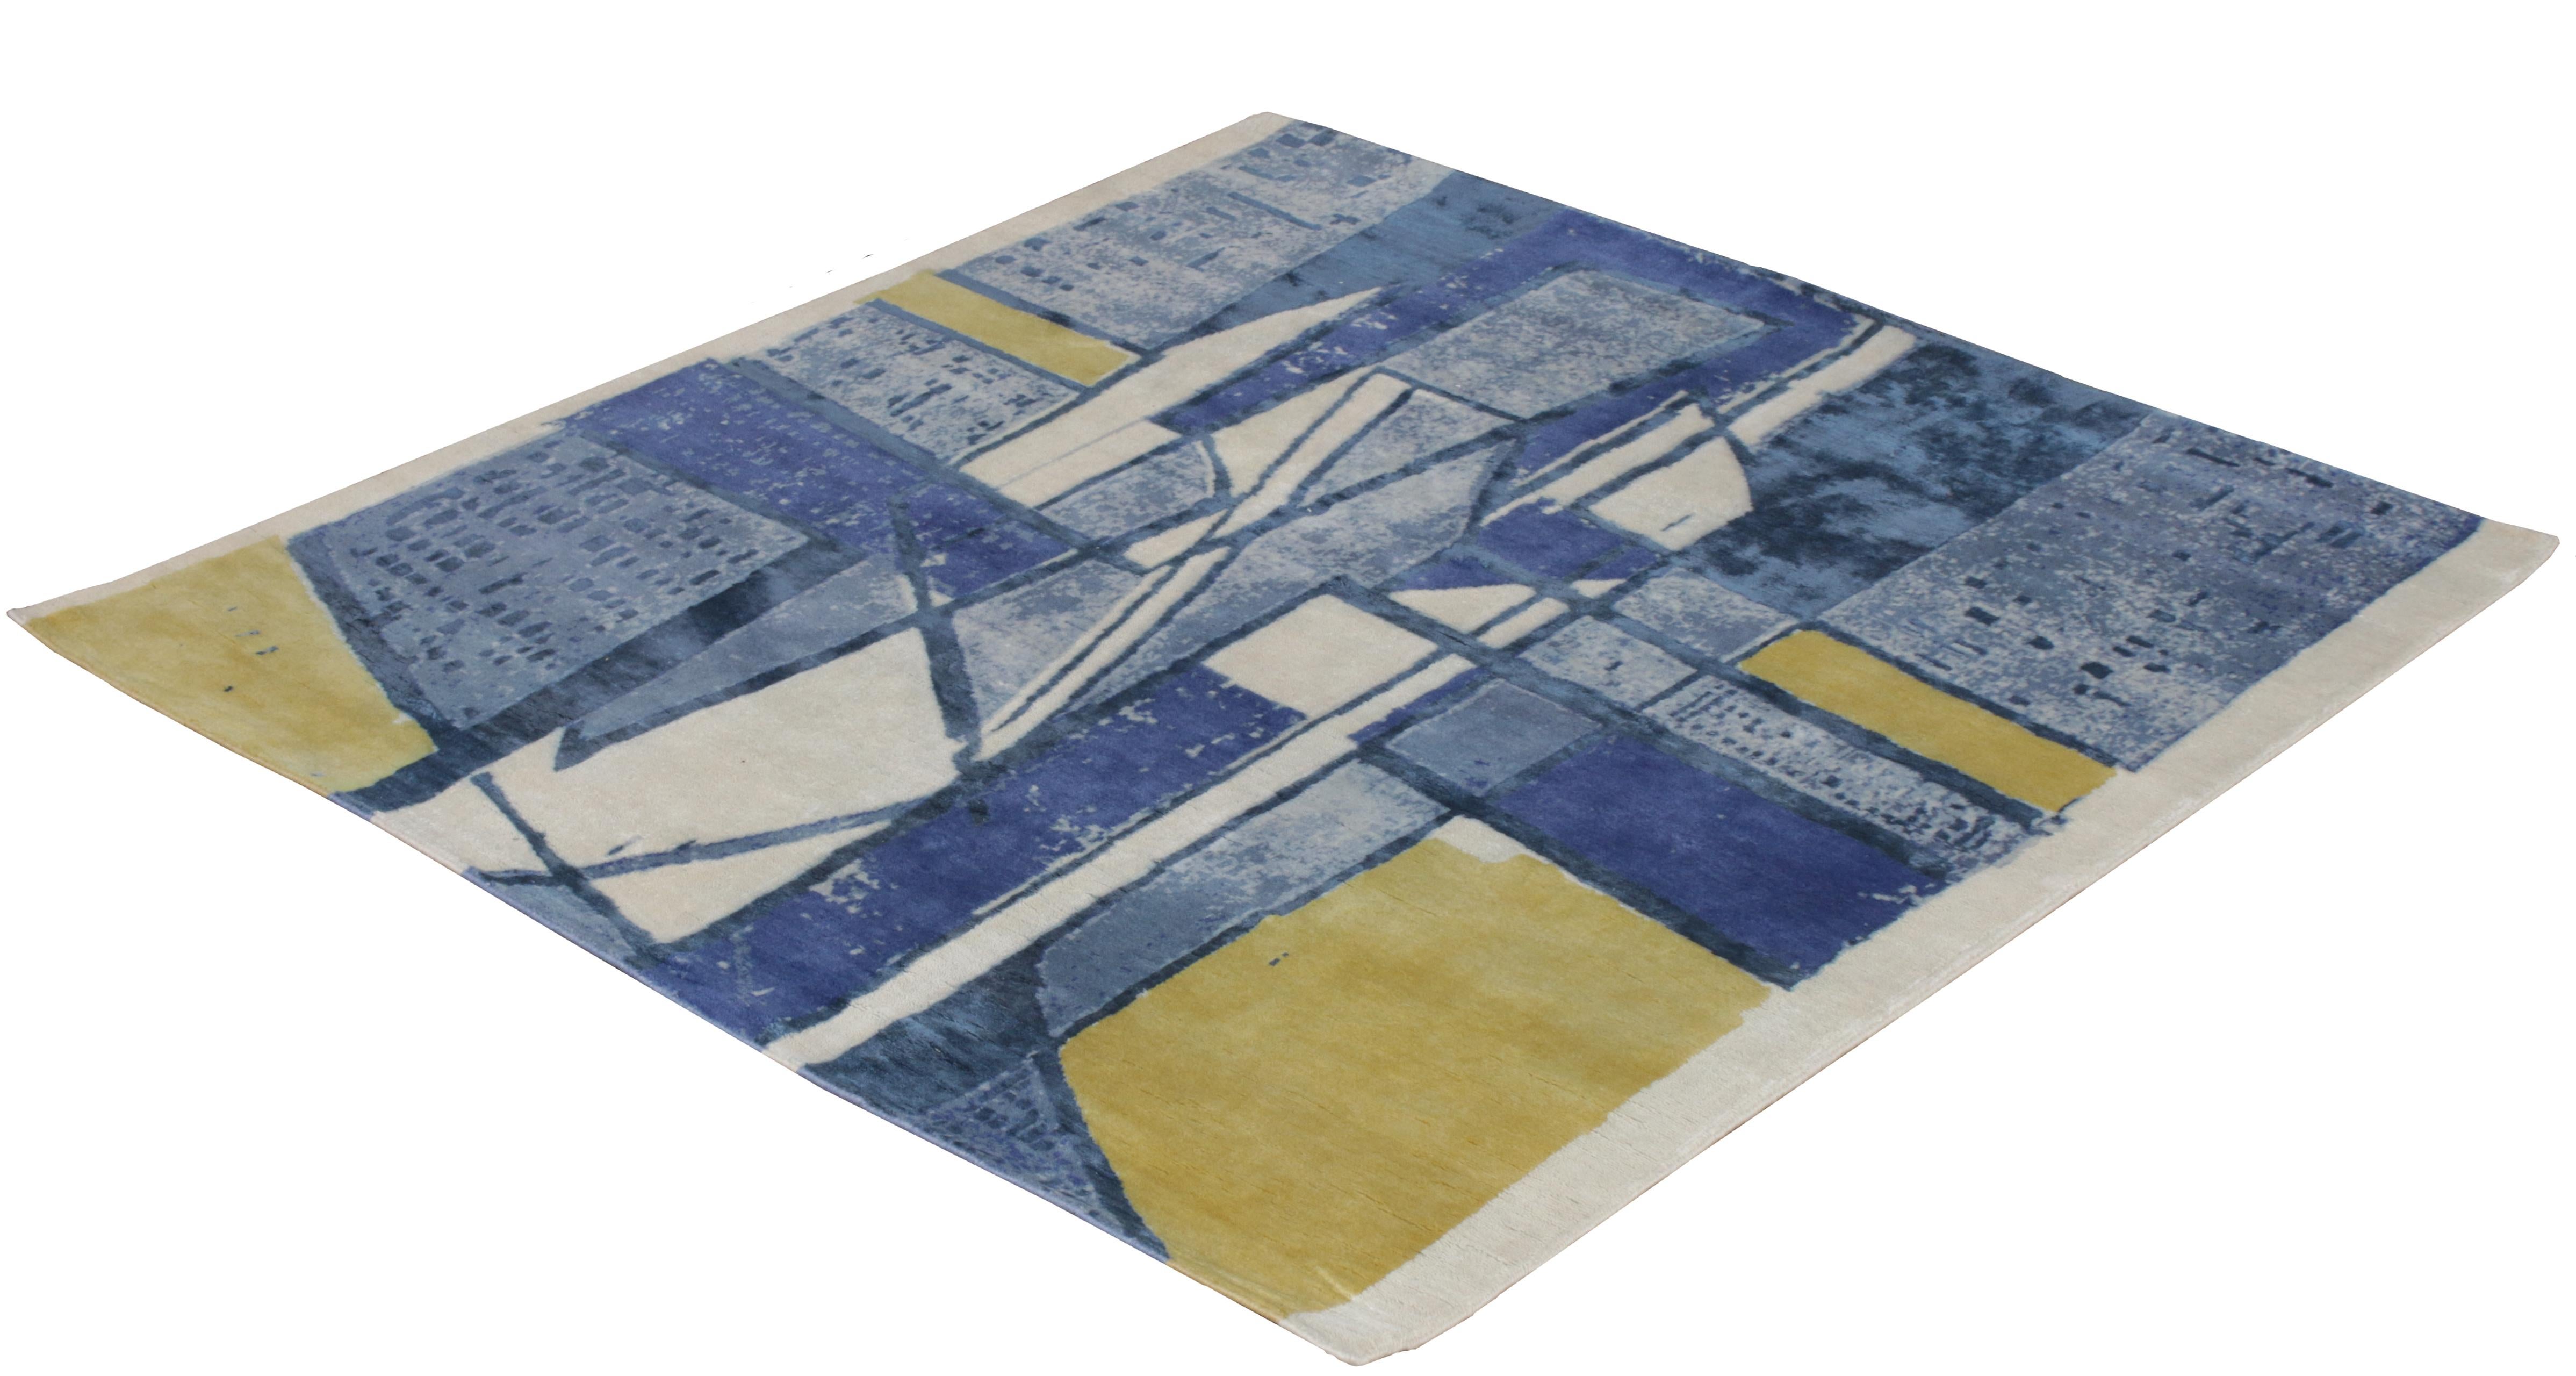 Divine Blue Yellow Geometric Mid Century Modern Rug. Country of Origin: India/ Circa Date: Modern - Size: 6 ft 2 in x 6 ft 4 in (1.87 m x 1.93m)
 